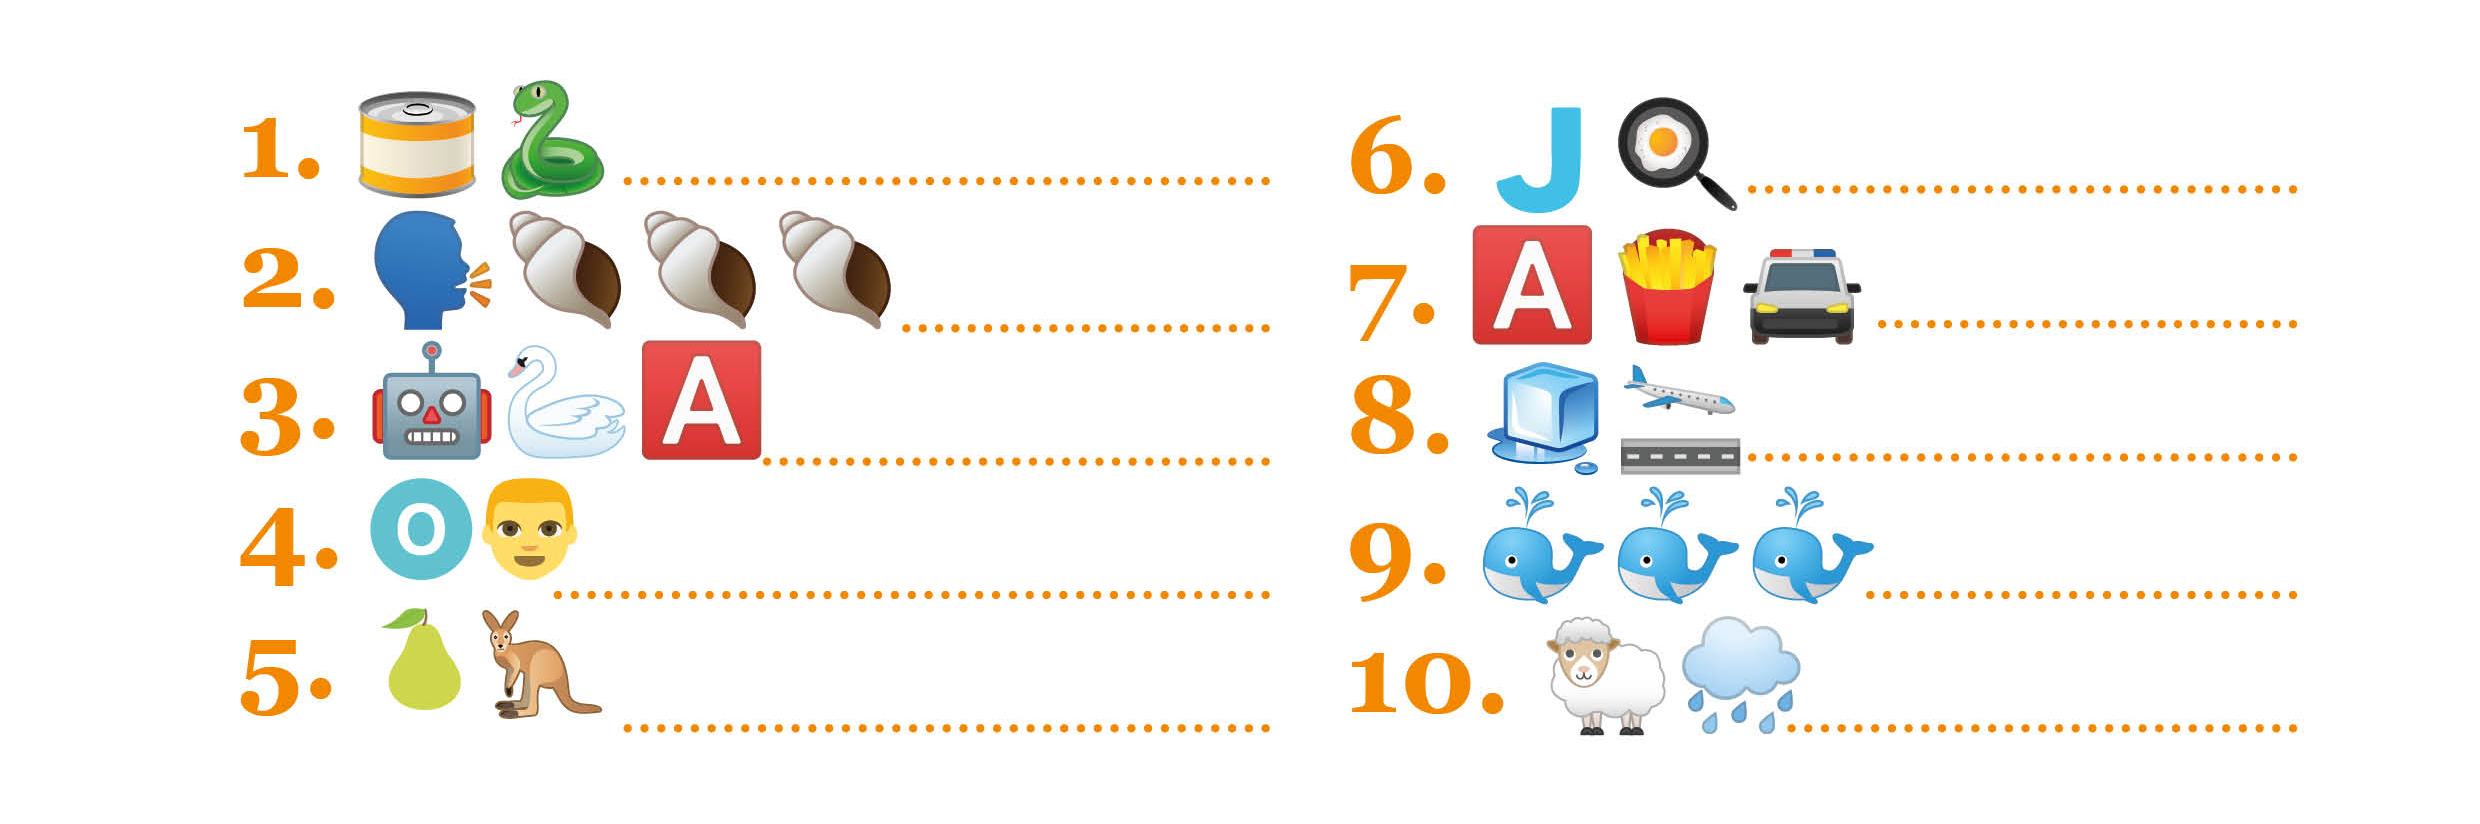 Can you read emoji - Holiday Architects Bumper Christmas Quiz3